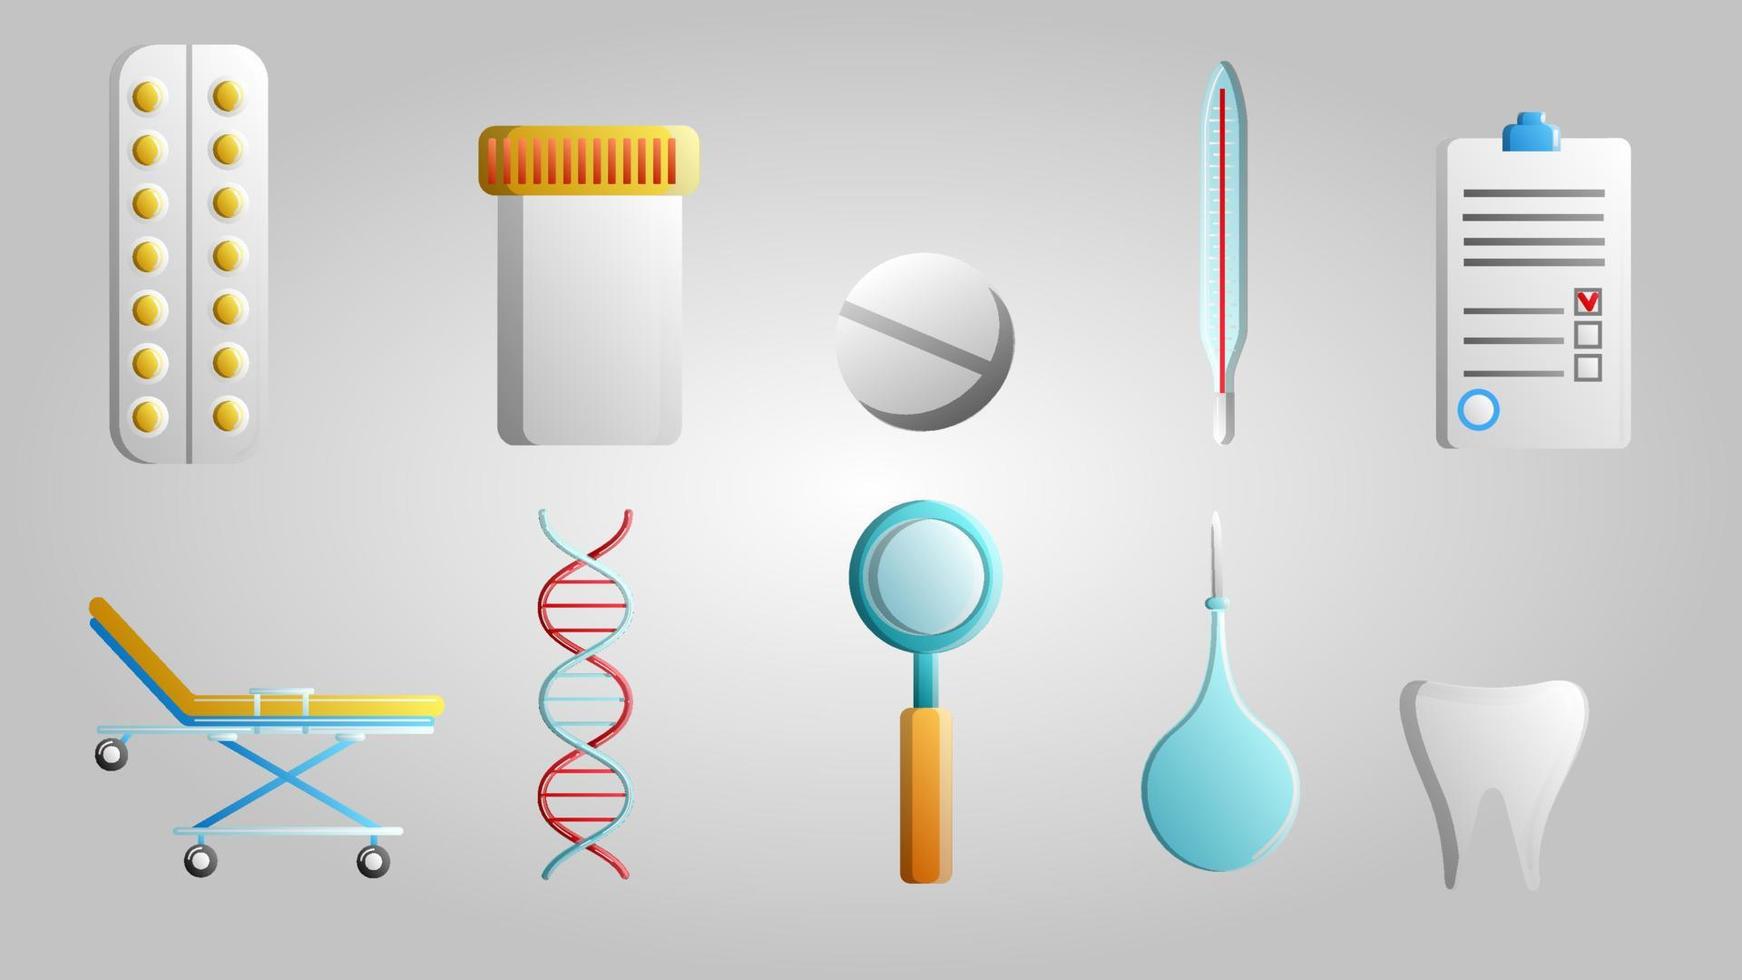 Large set of 10 medical scientific medical medical items jar icons with pills capsules beds thermometers dna documents on a white background. Vector illustration